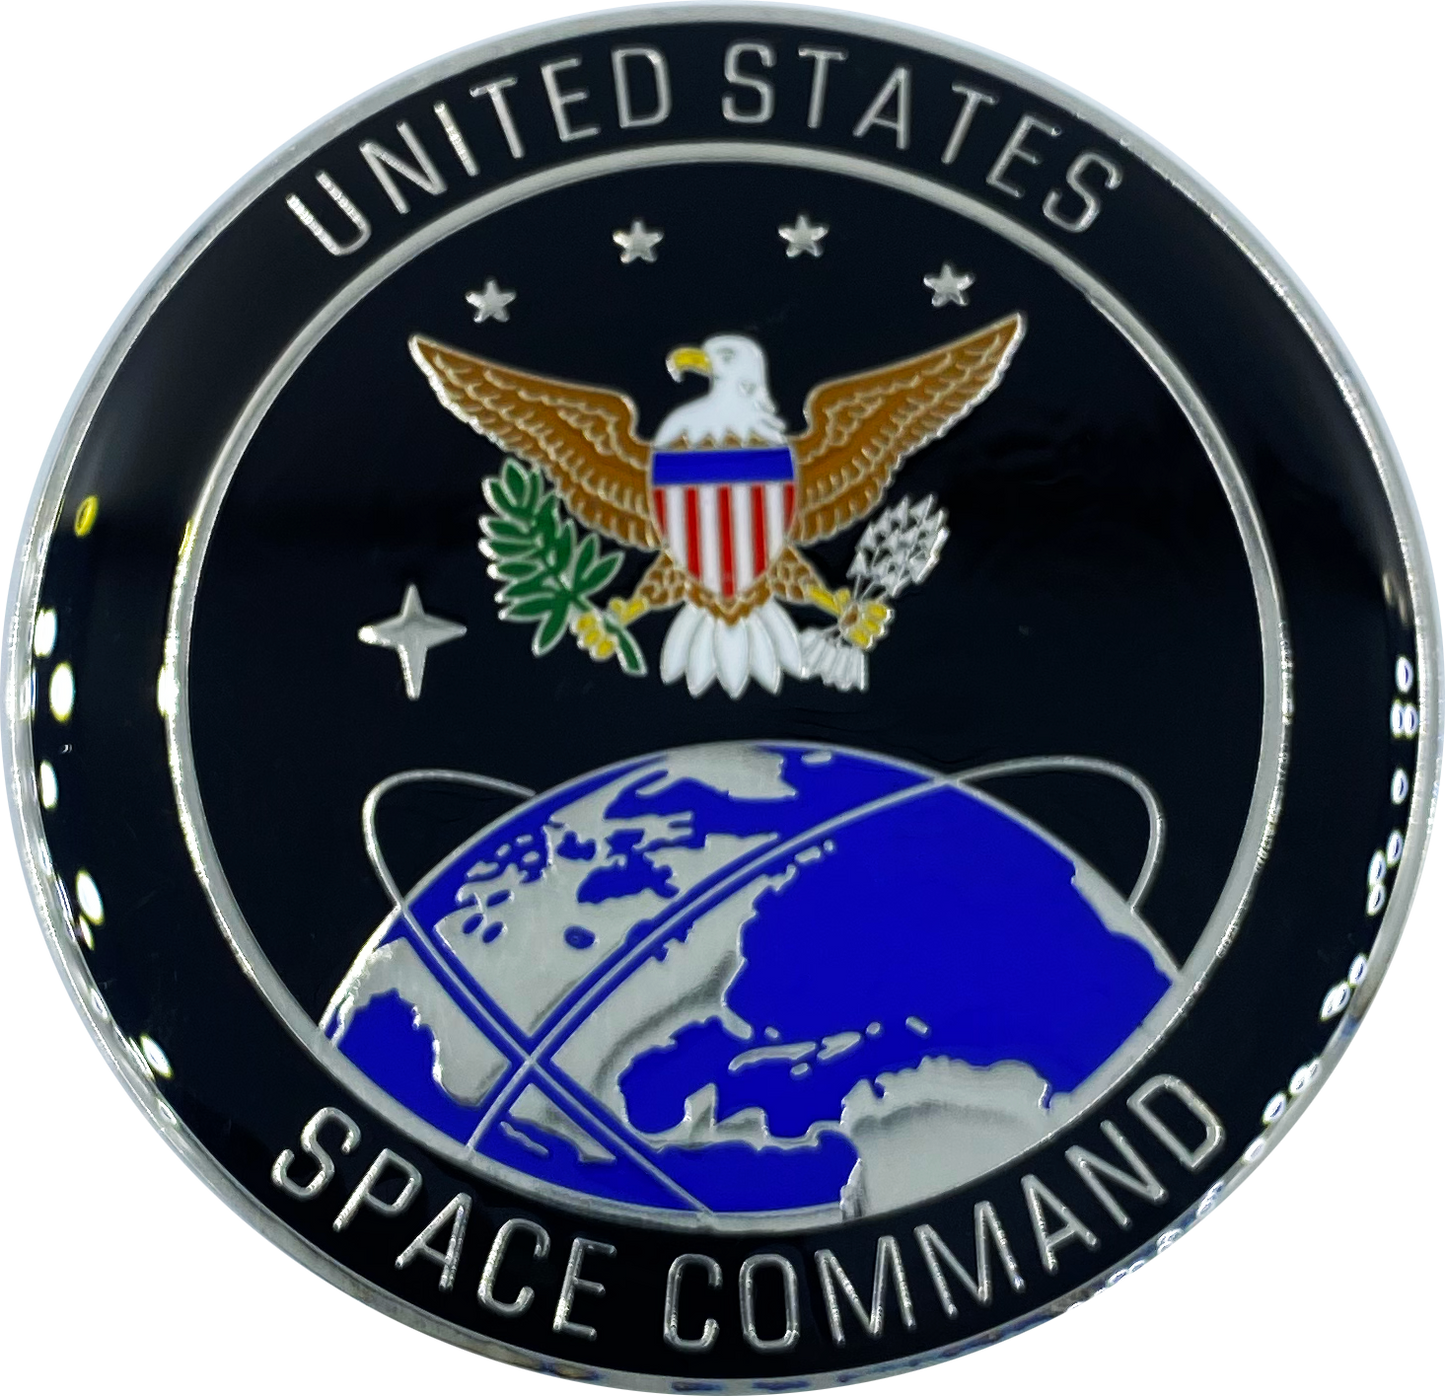 CL12-02 Space Force Space Command USAF Large 2.5 inch full size uniform campaign device (pin) with 3 posts and deluxe locking clasps Air Force